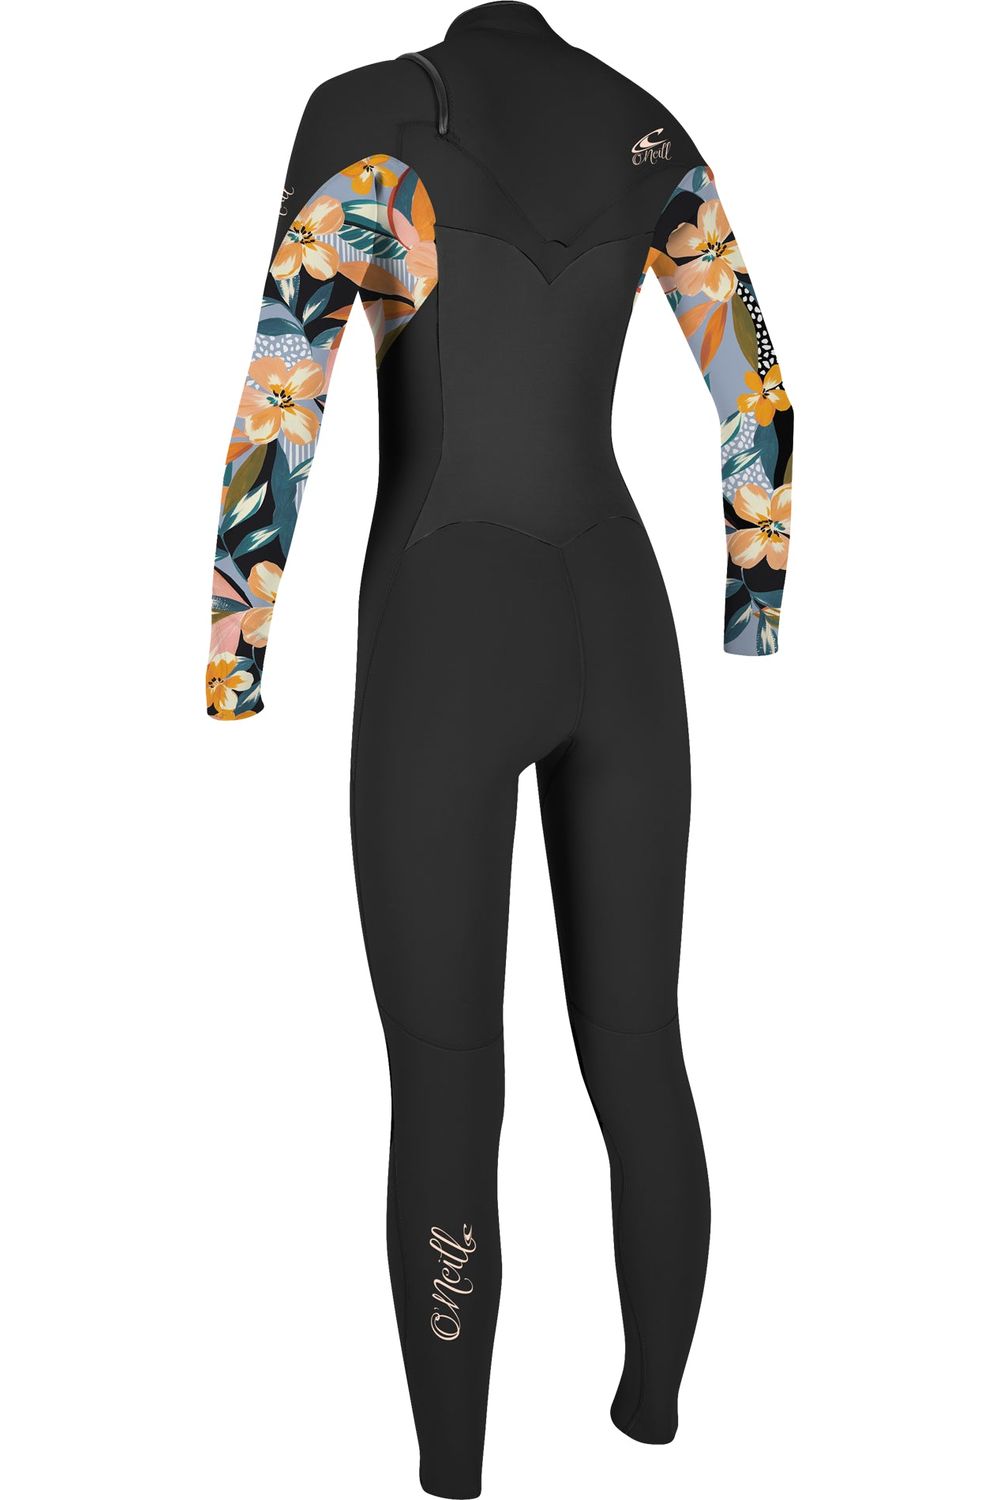 O'Neill Epic Women's 3/2 Wetsuit With Chest Zip In Black & Demiflor